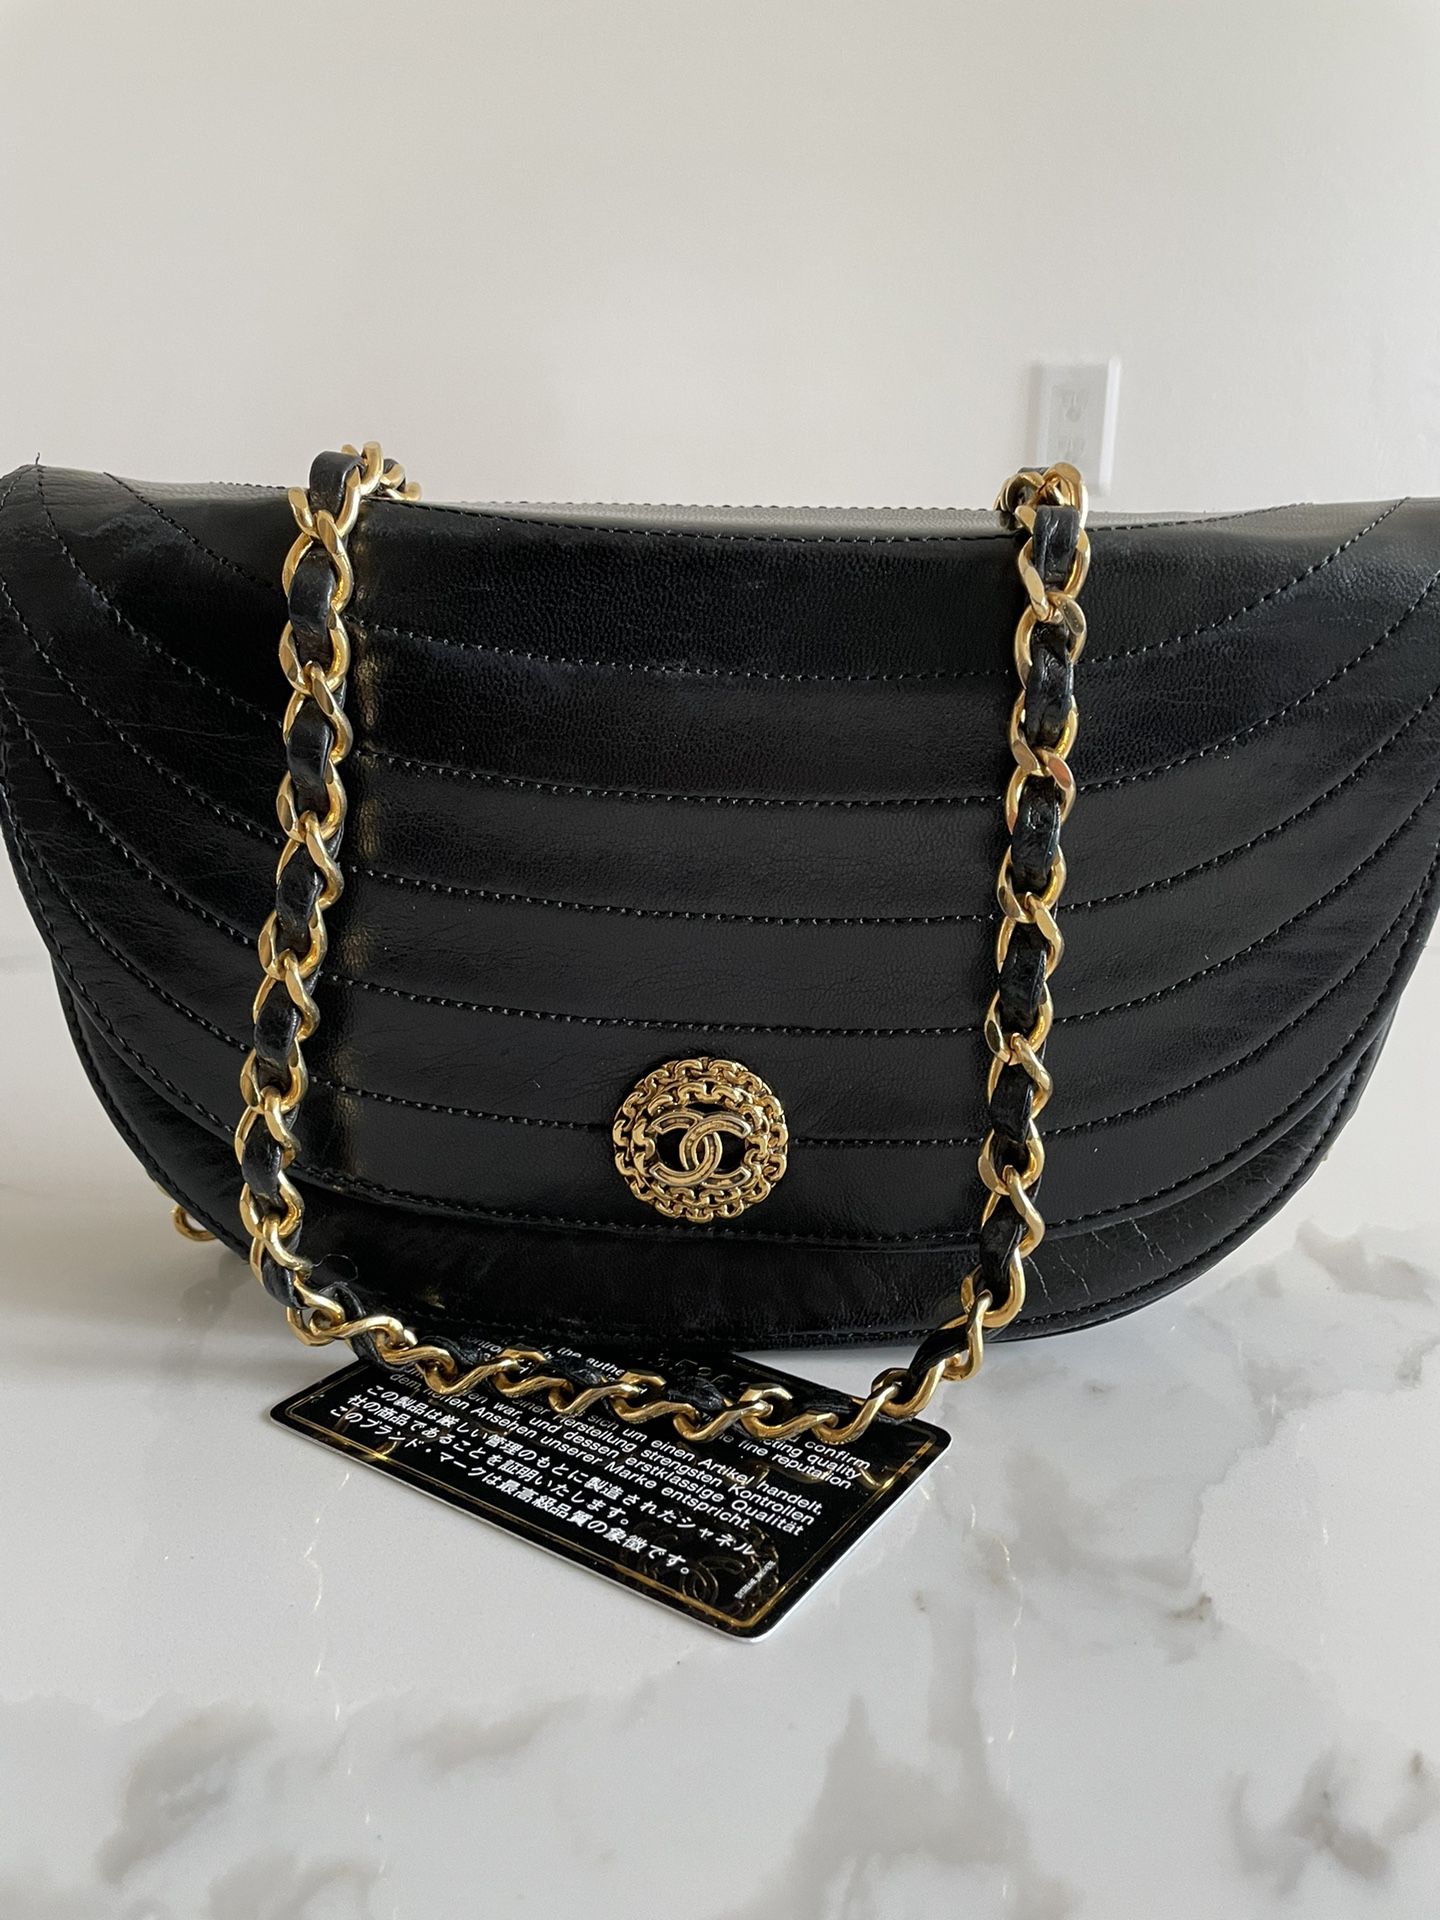 chanel black purse with chain